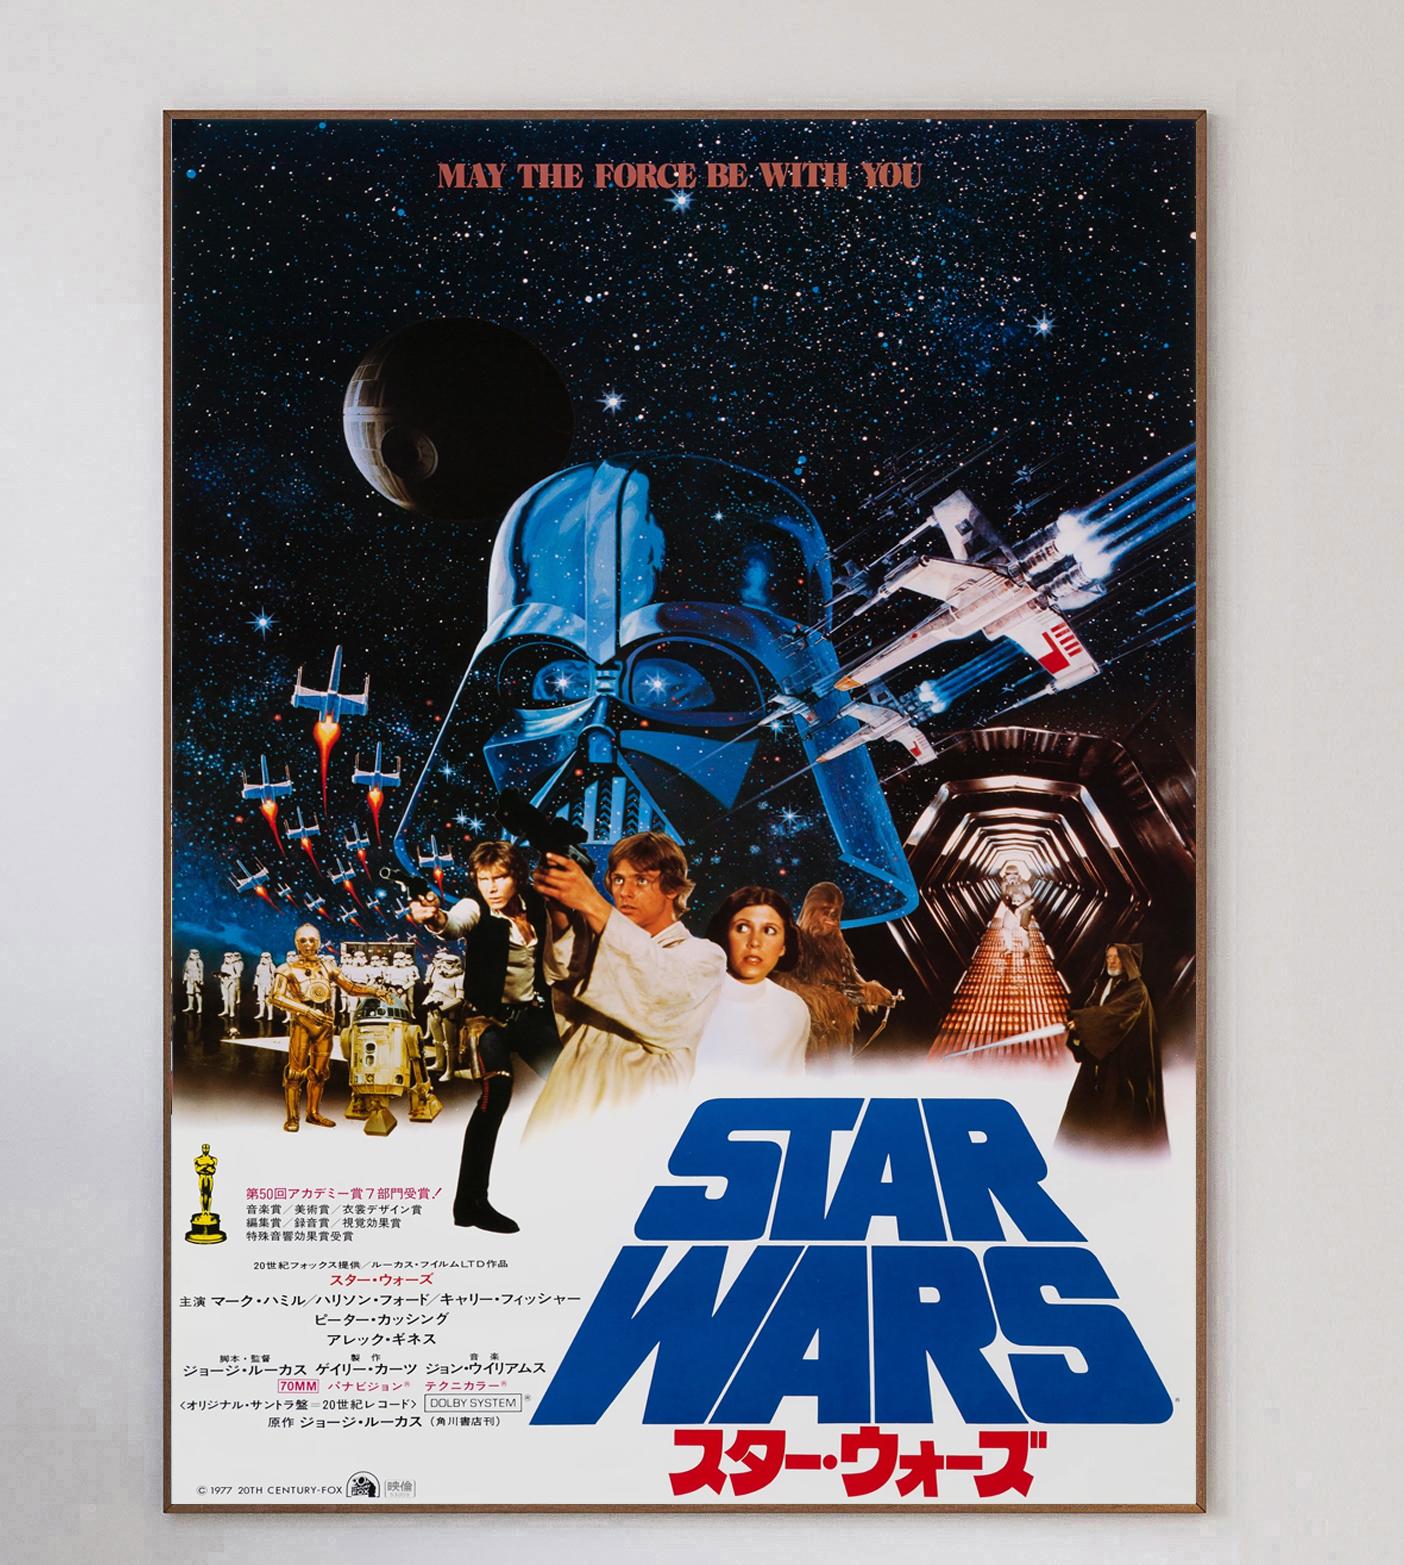 Star Wars (retroactively titled Star Wars: Episode IV – A New Hope) is a 1977 American epic space opera film written and directed by George Lucas, produced by Lucasfilm and distributed by 20th Century-Fox. It stars Mark Hamill, Harrison Ford, Carrie